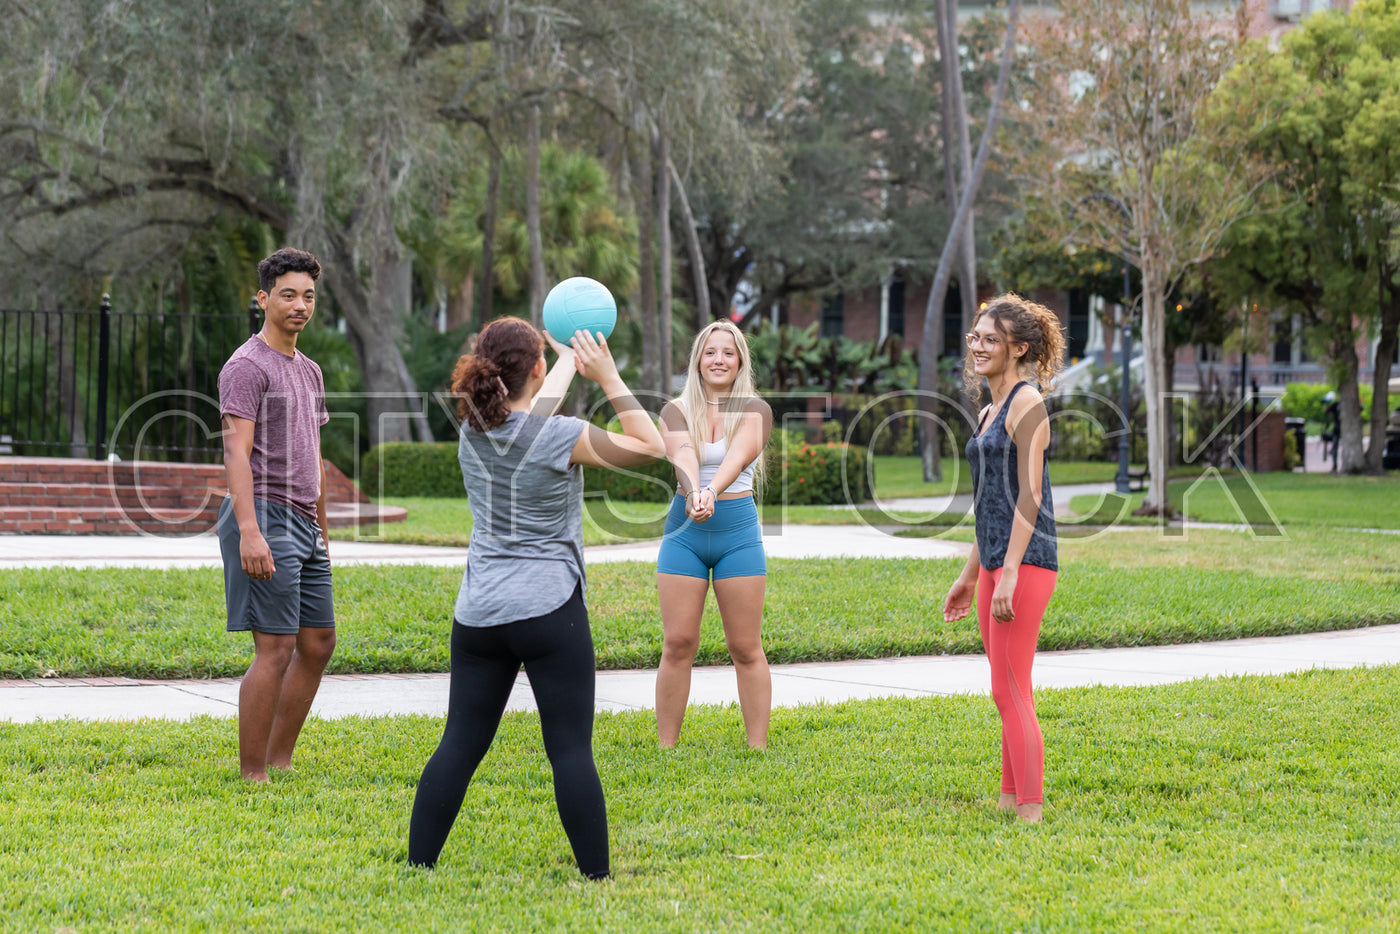 Young Adults Playing Ball Game in Urban Park, Tampa